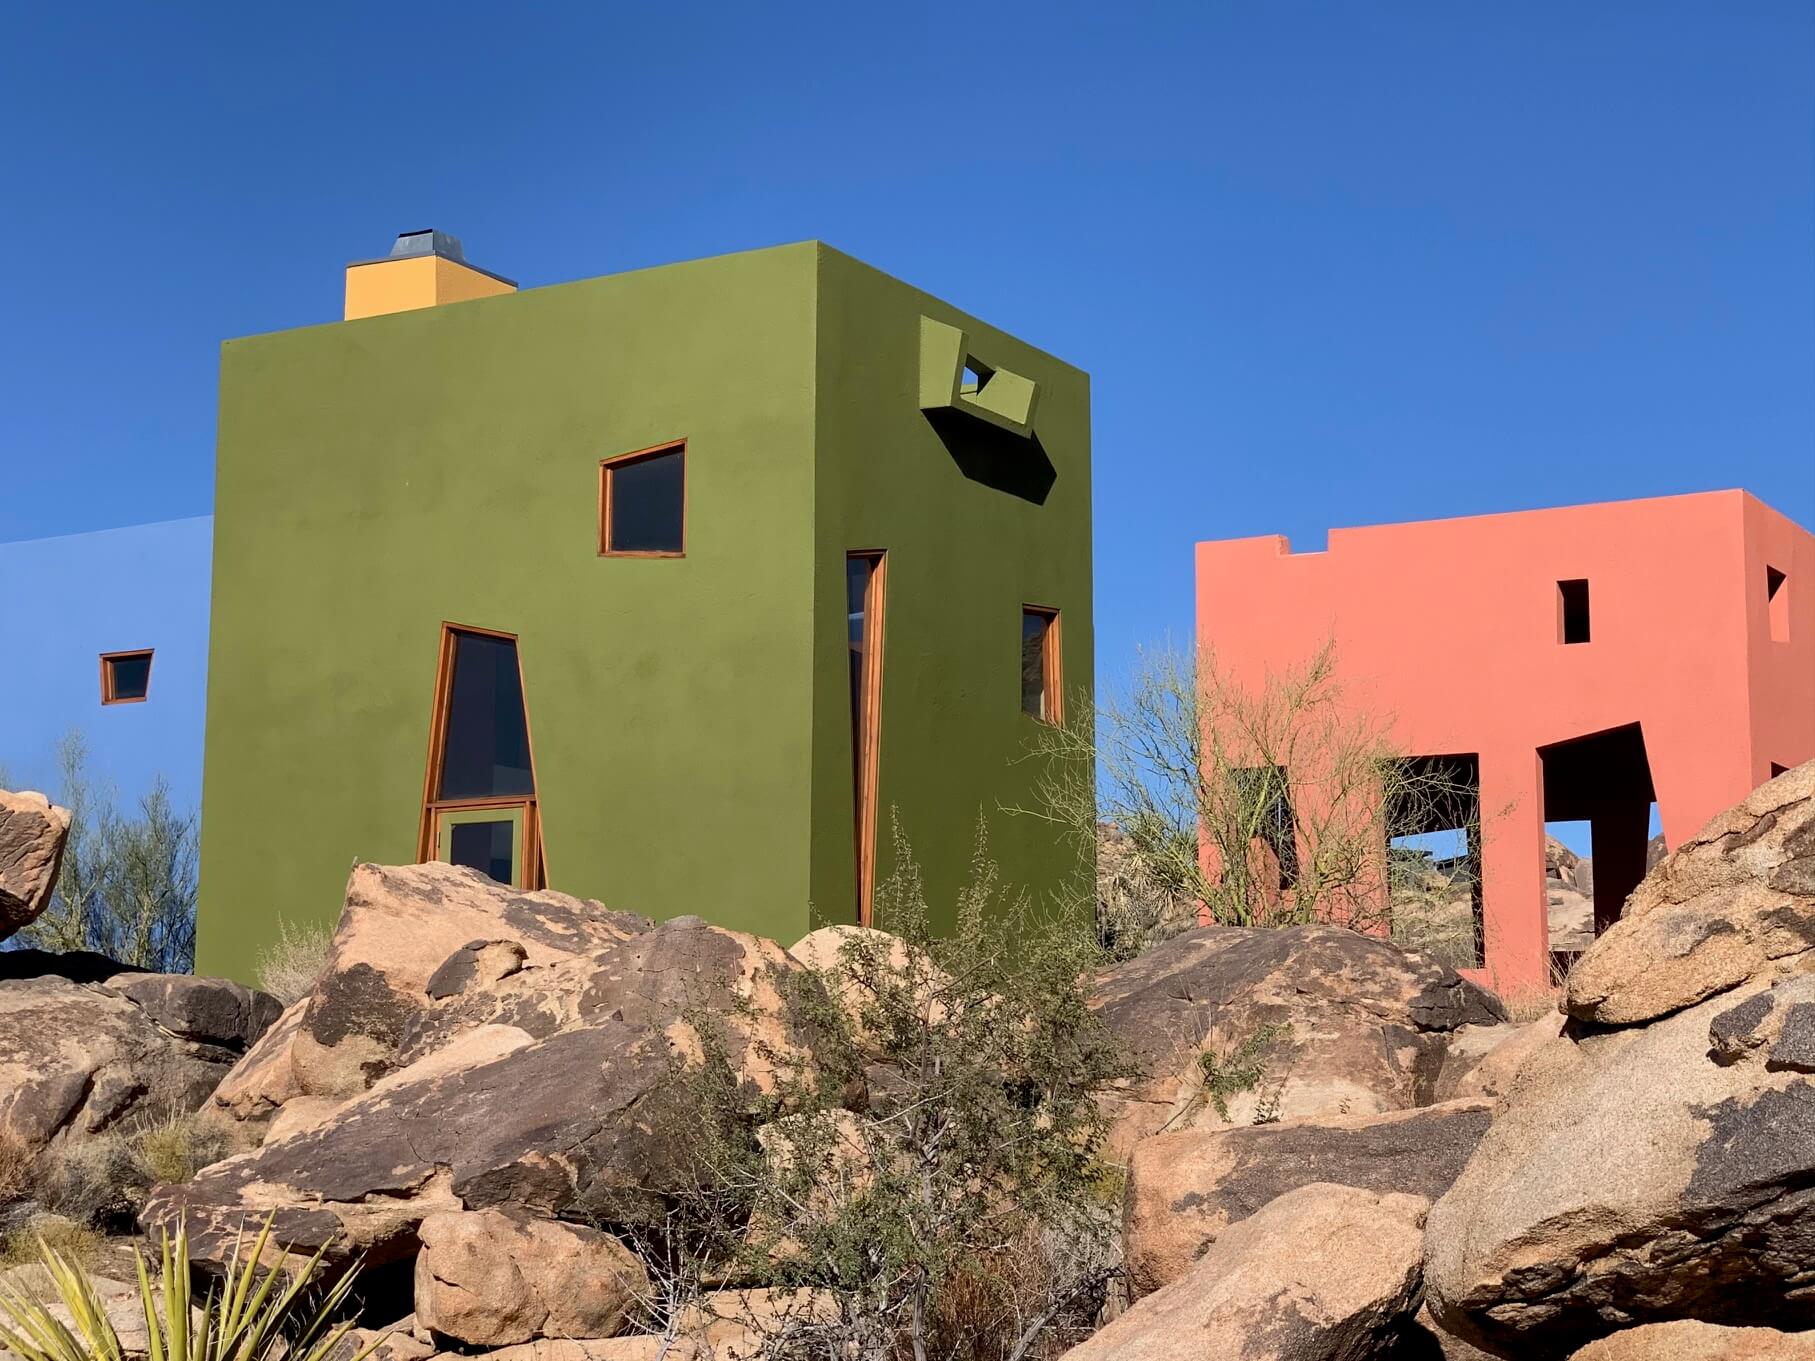 Exterior of blocky colorful homes amid mountains